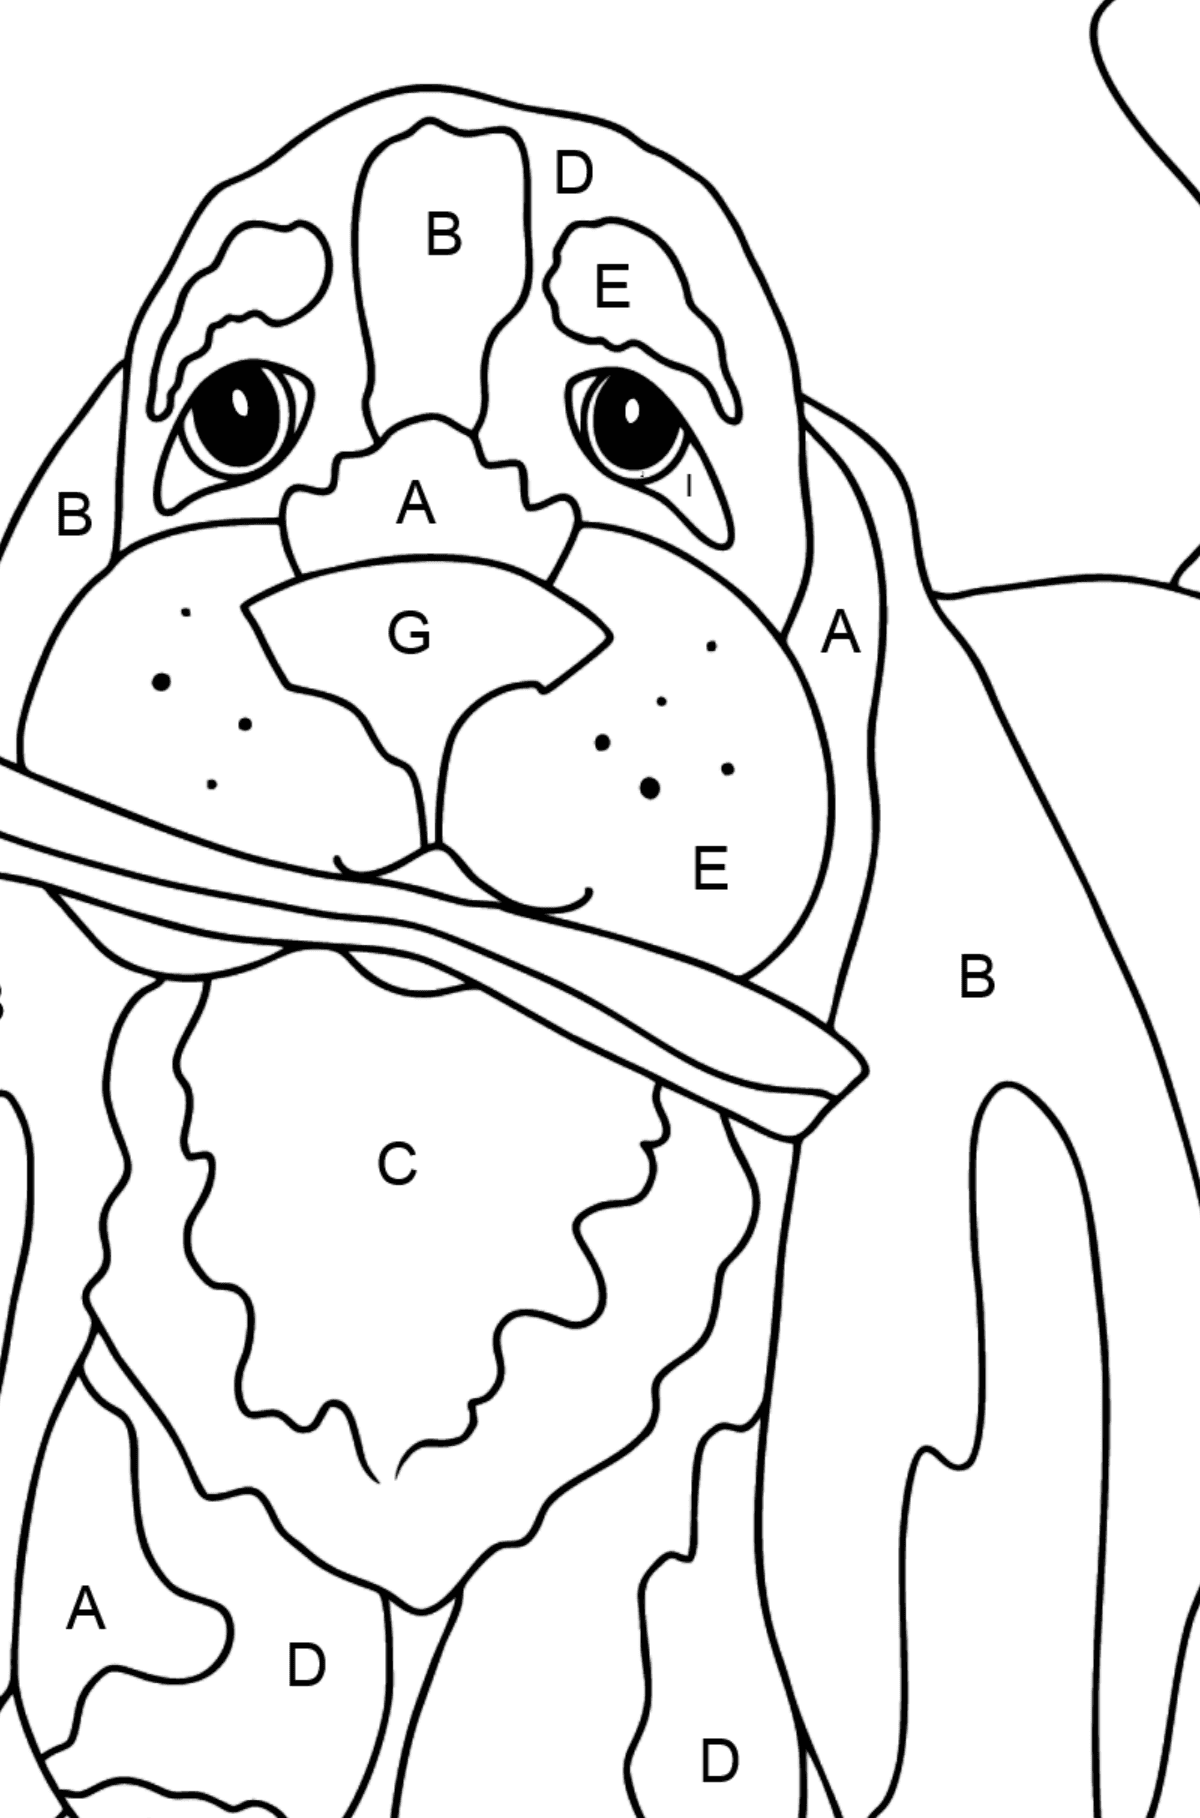 Coloring Page - A Dog is Waiting for Its Owner with a Stick - Coloring by Letters for Kids